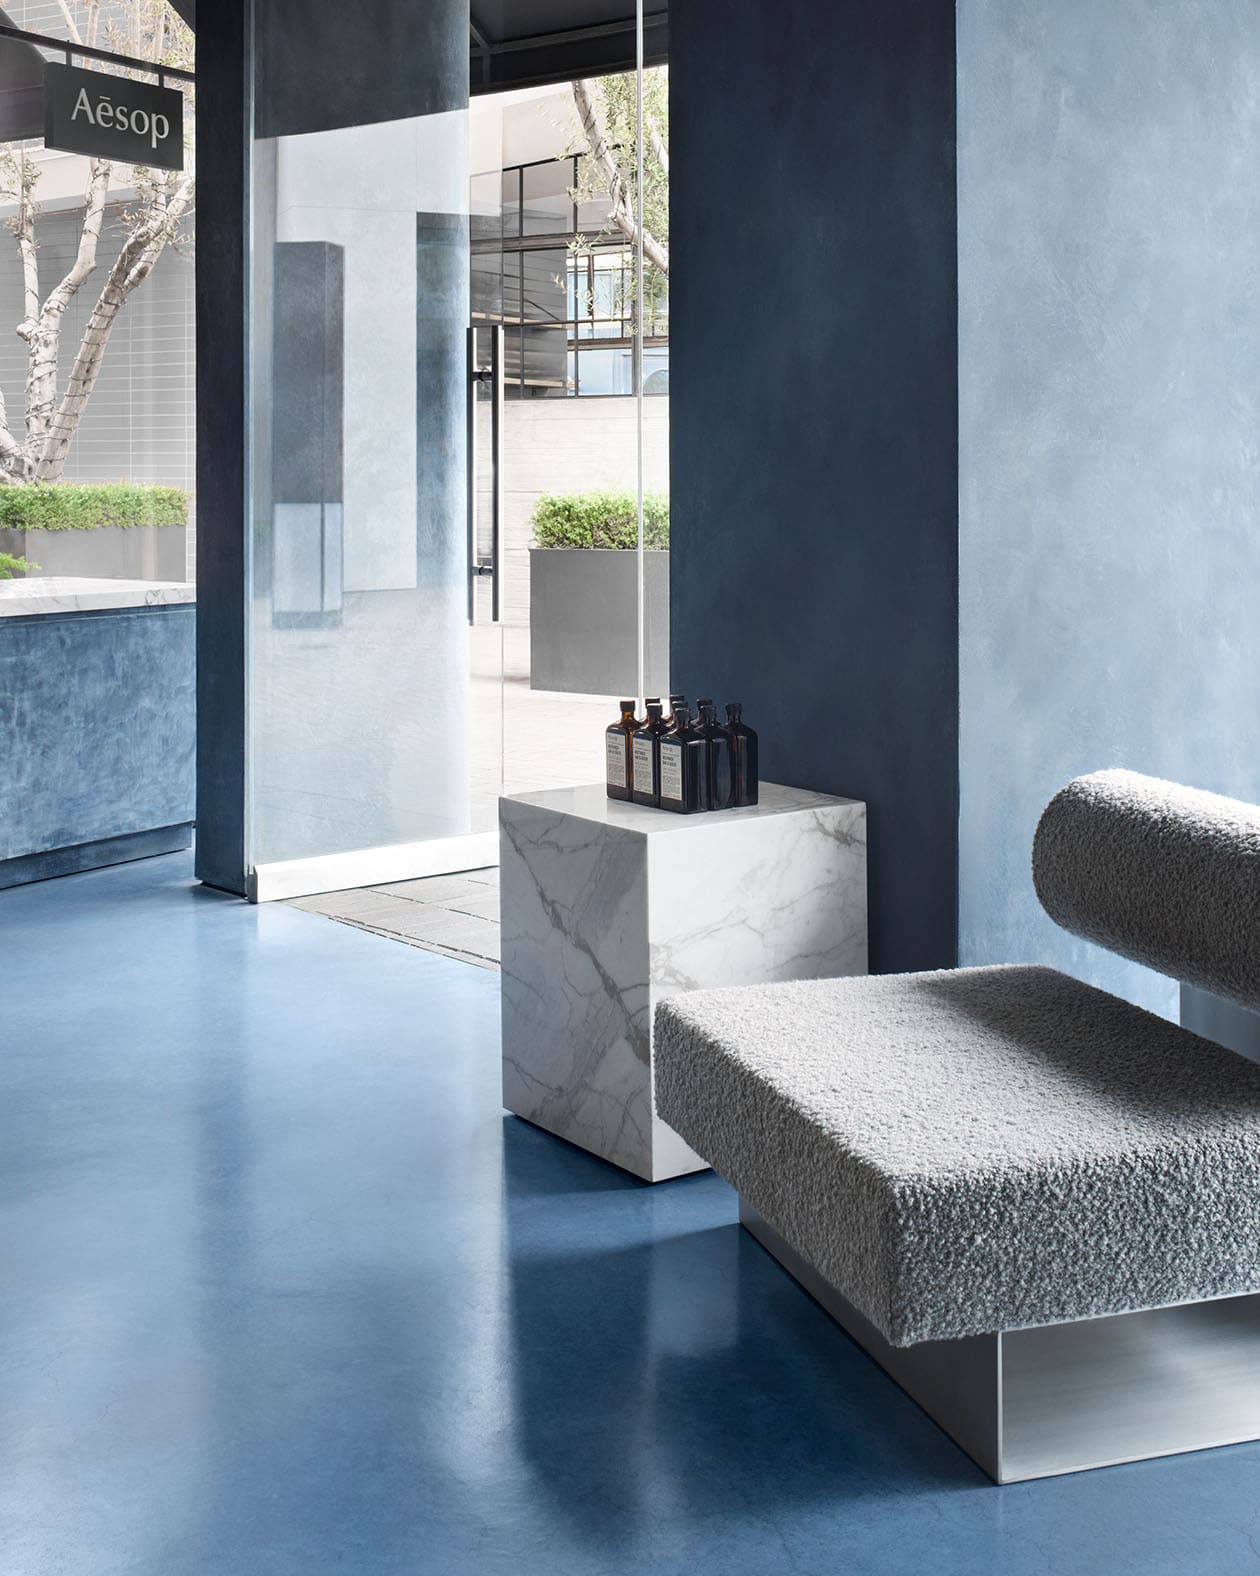 store interior shot featuring blue cement floor, grey textured modern chair, a marble block table, and a glass door leaving the store